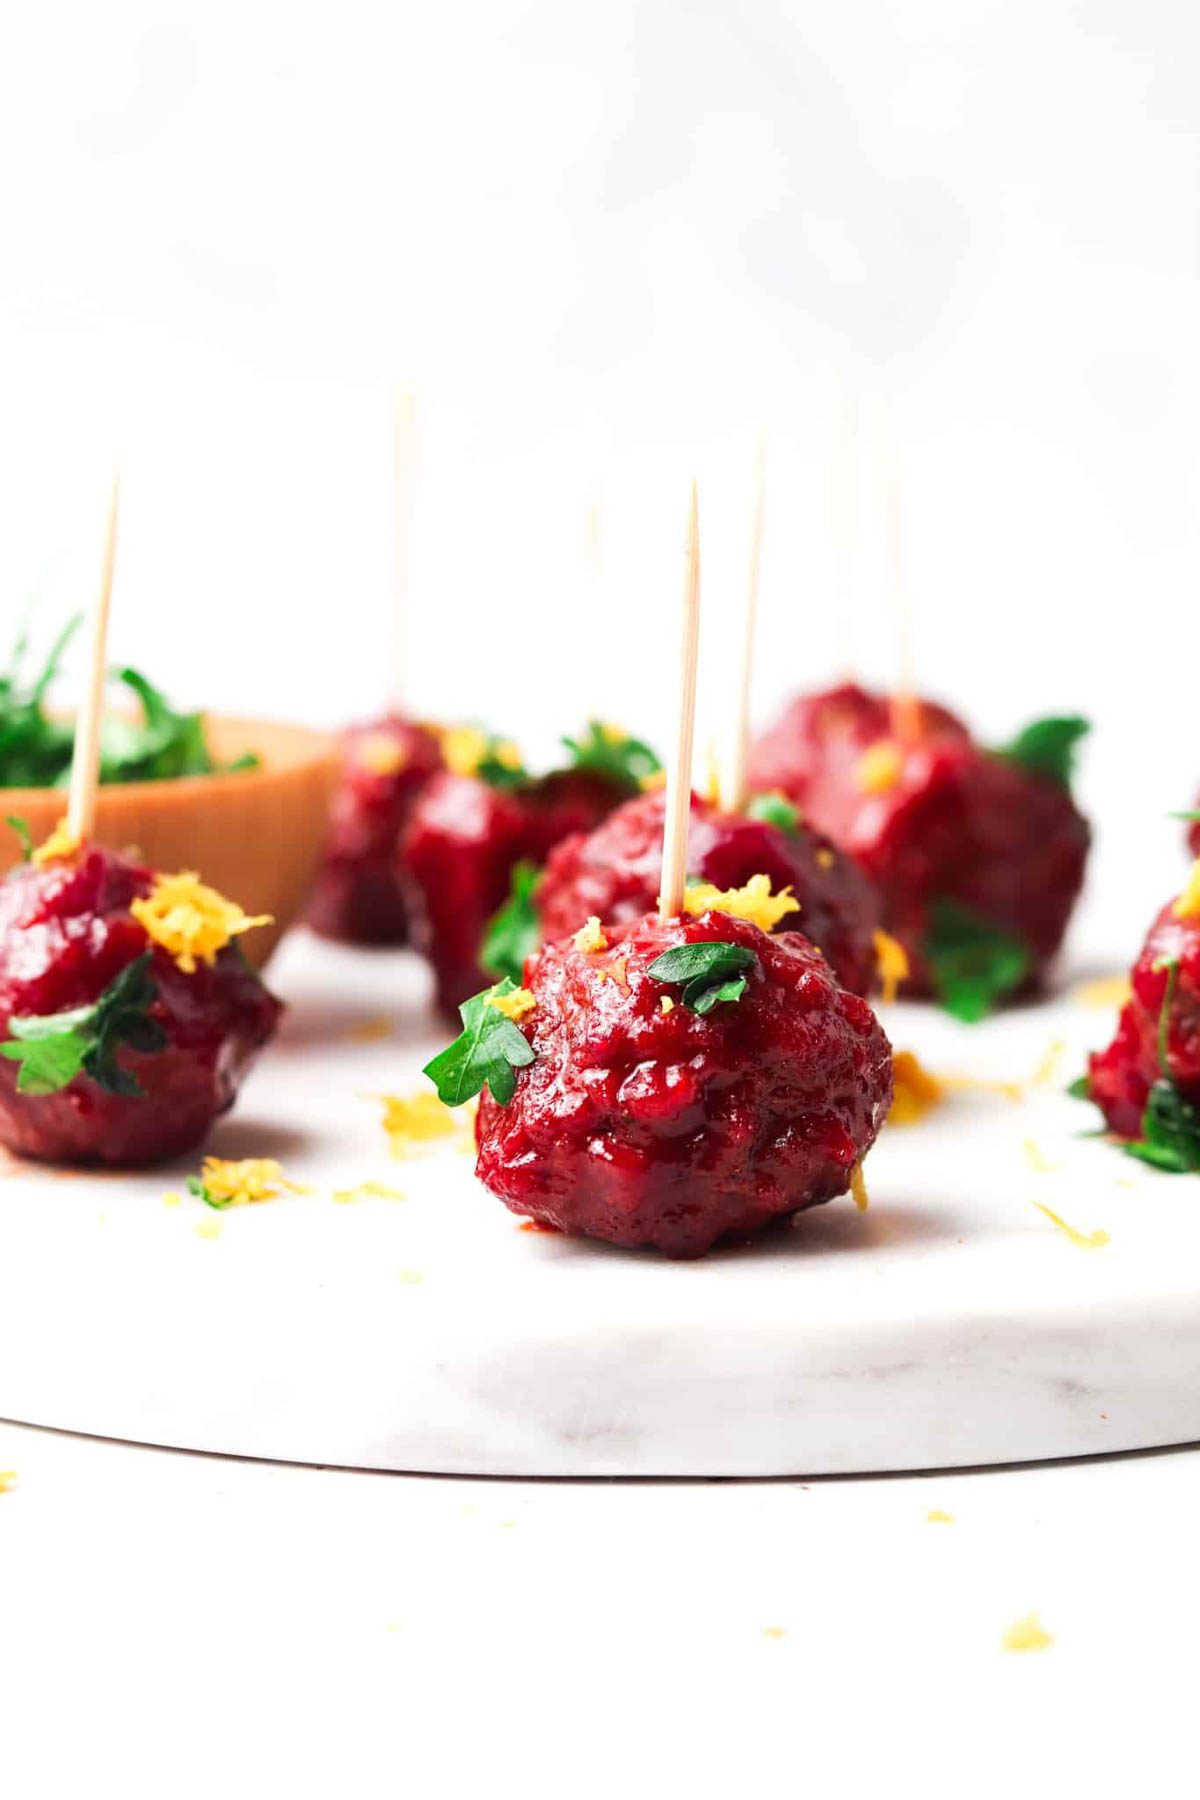 Cranberry BBQ meatballs garnishes with fresh green herbs and citrus zest with a toothpick in them.